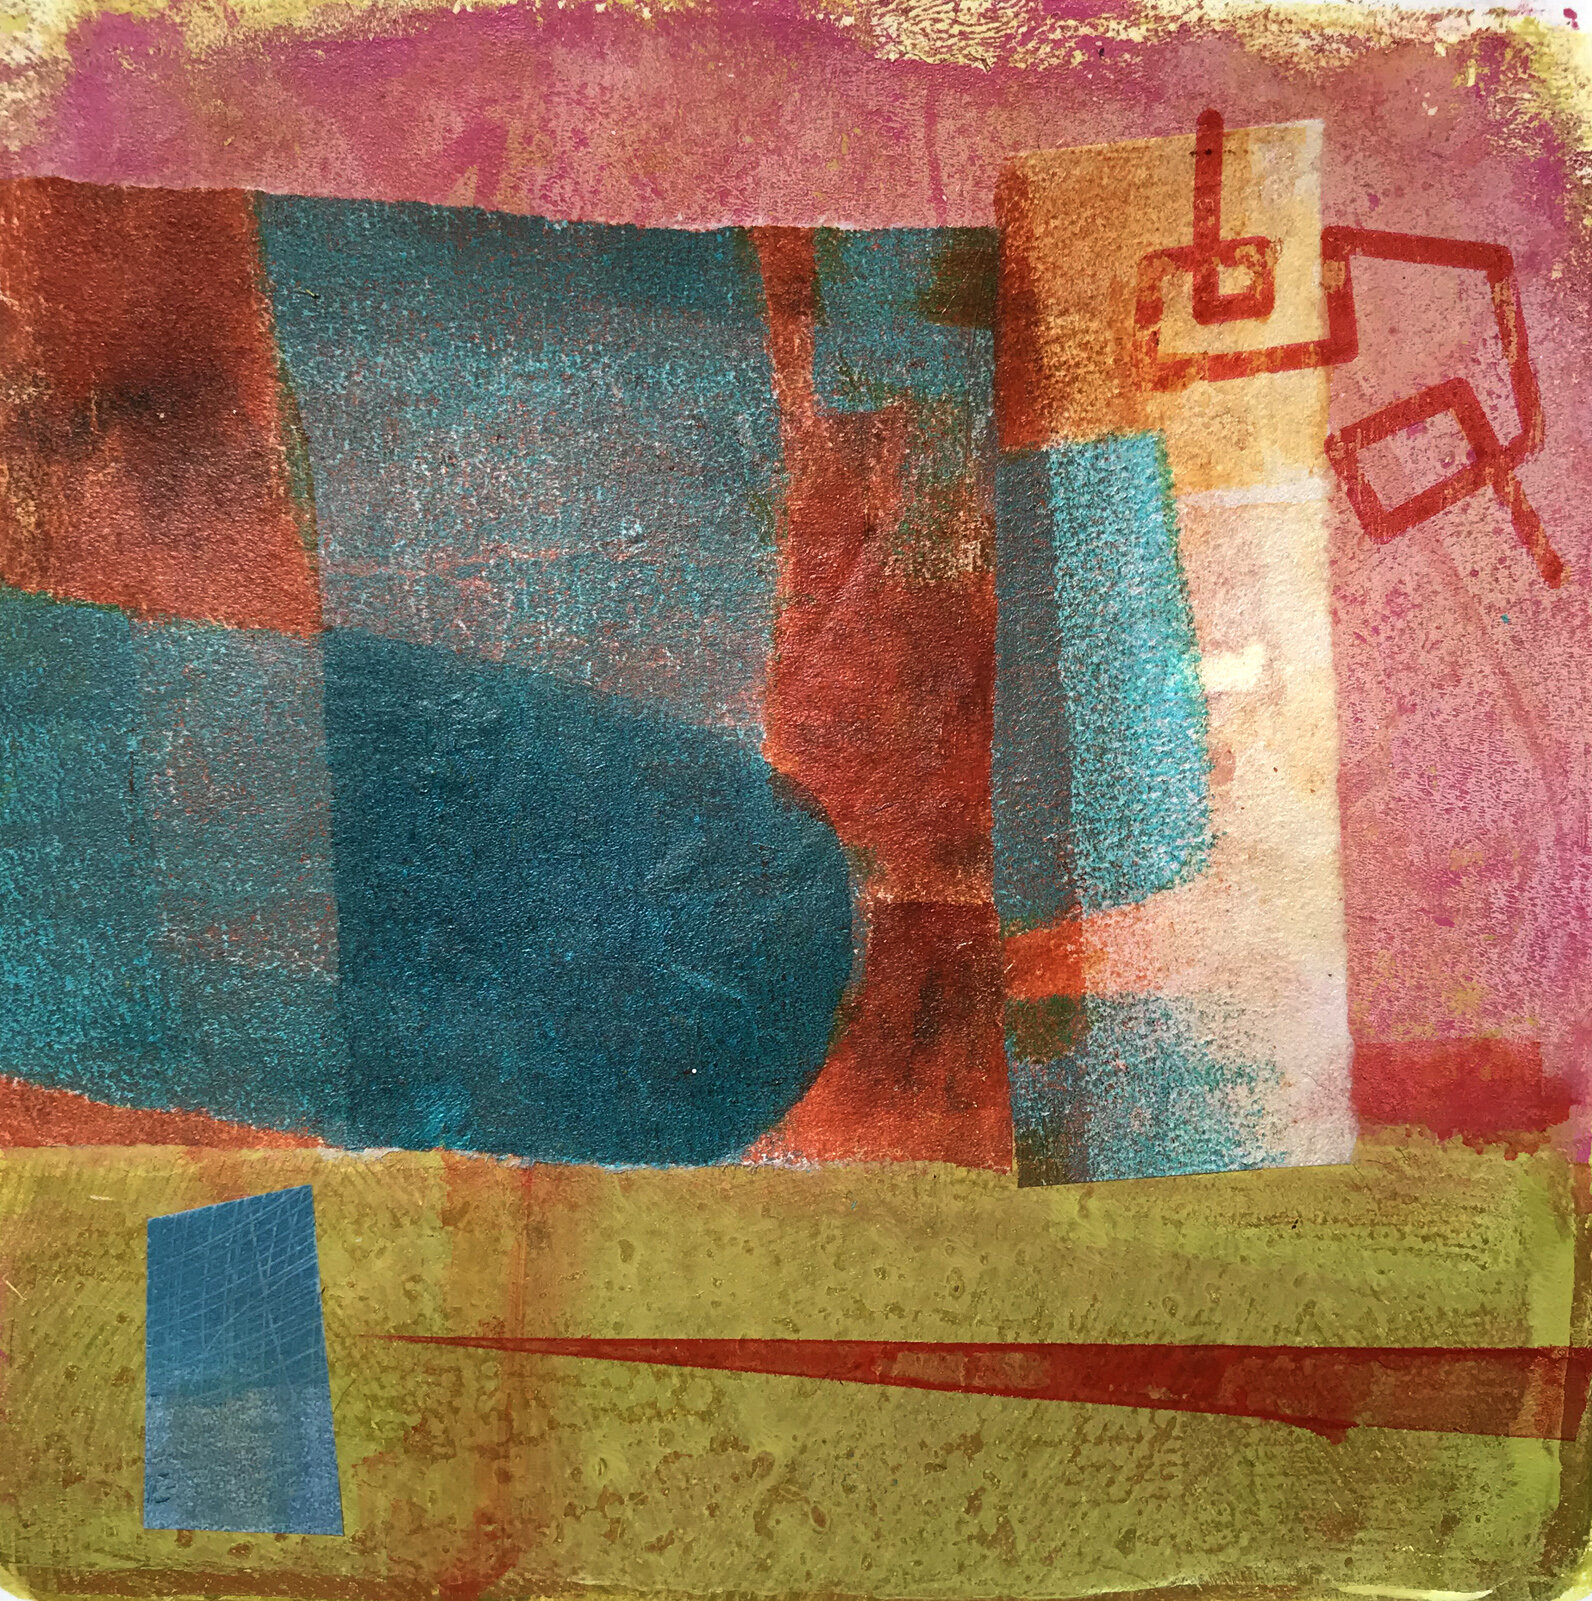   Object Thoughts 6,  monoprint, collage, 13 x 13 inches 